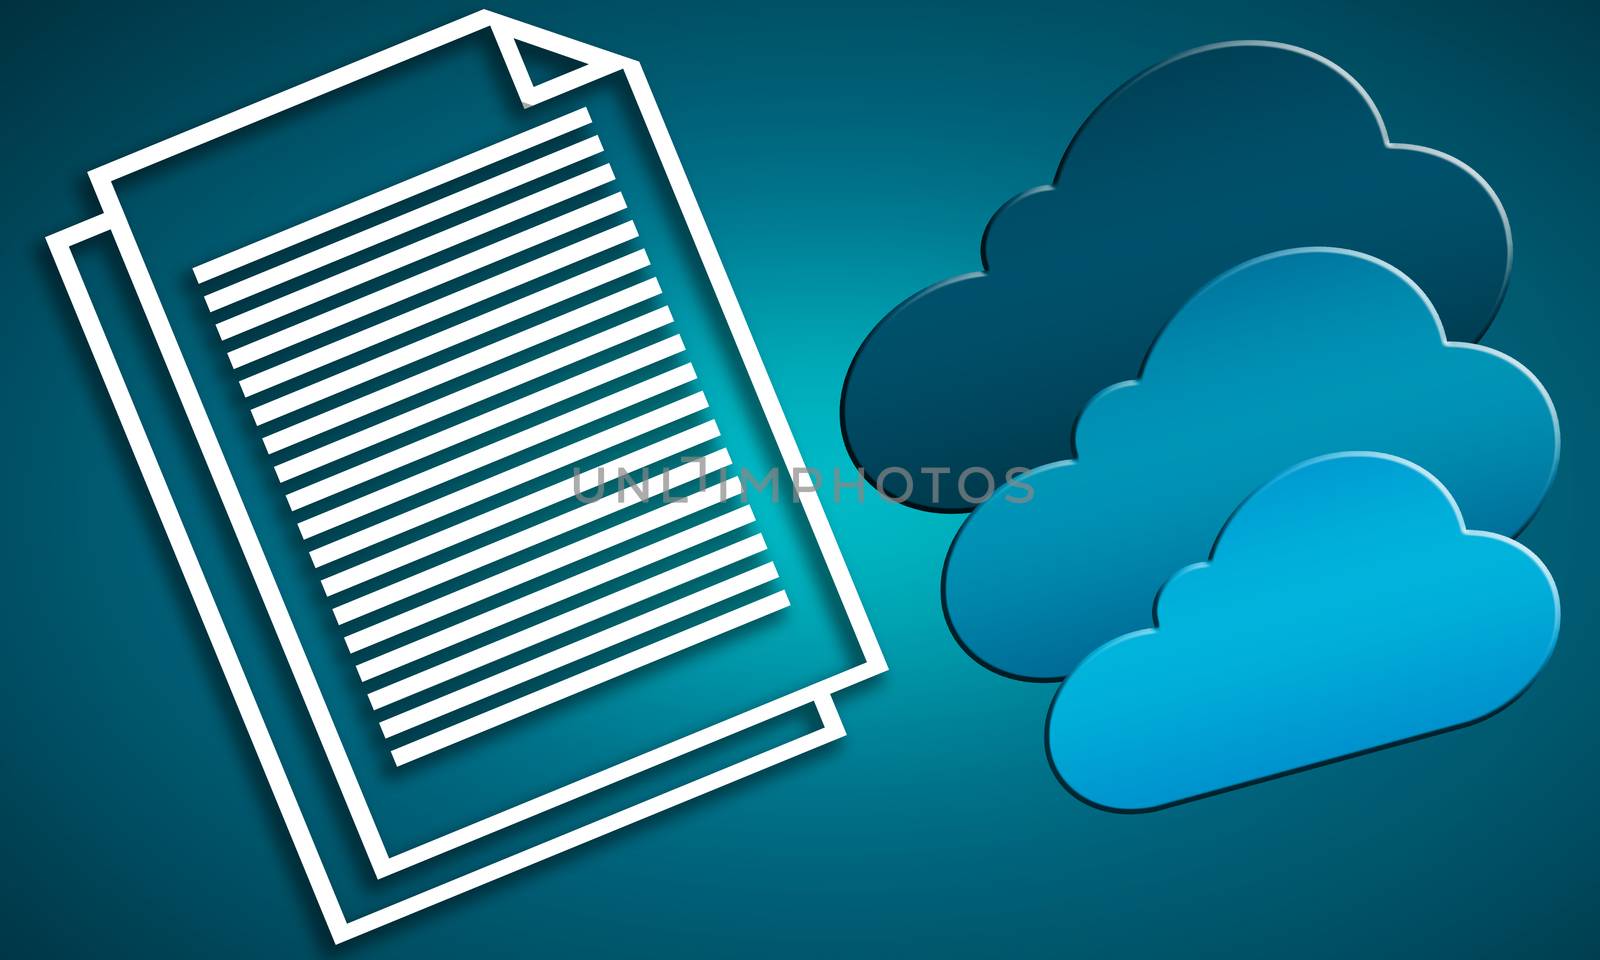 Blue internet cloud icon and White line text document, 3d rendering